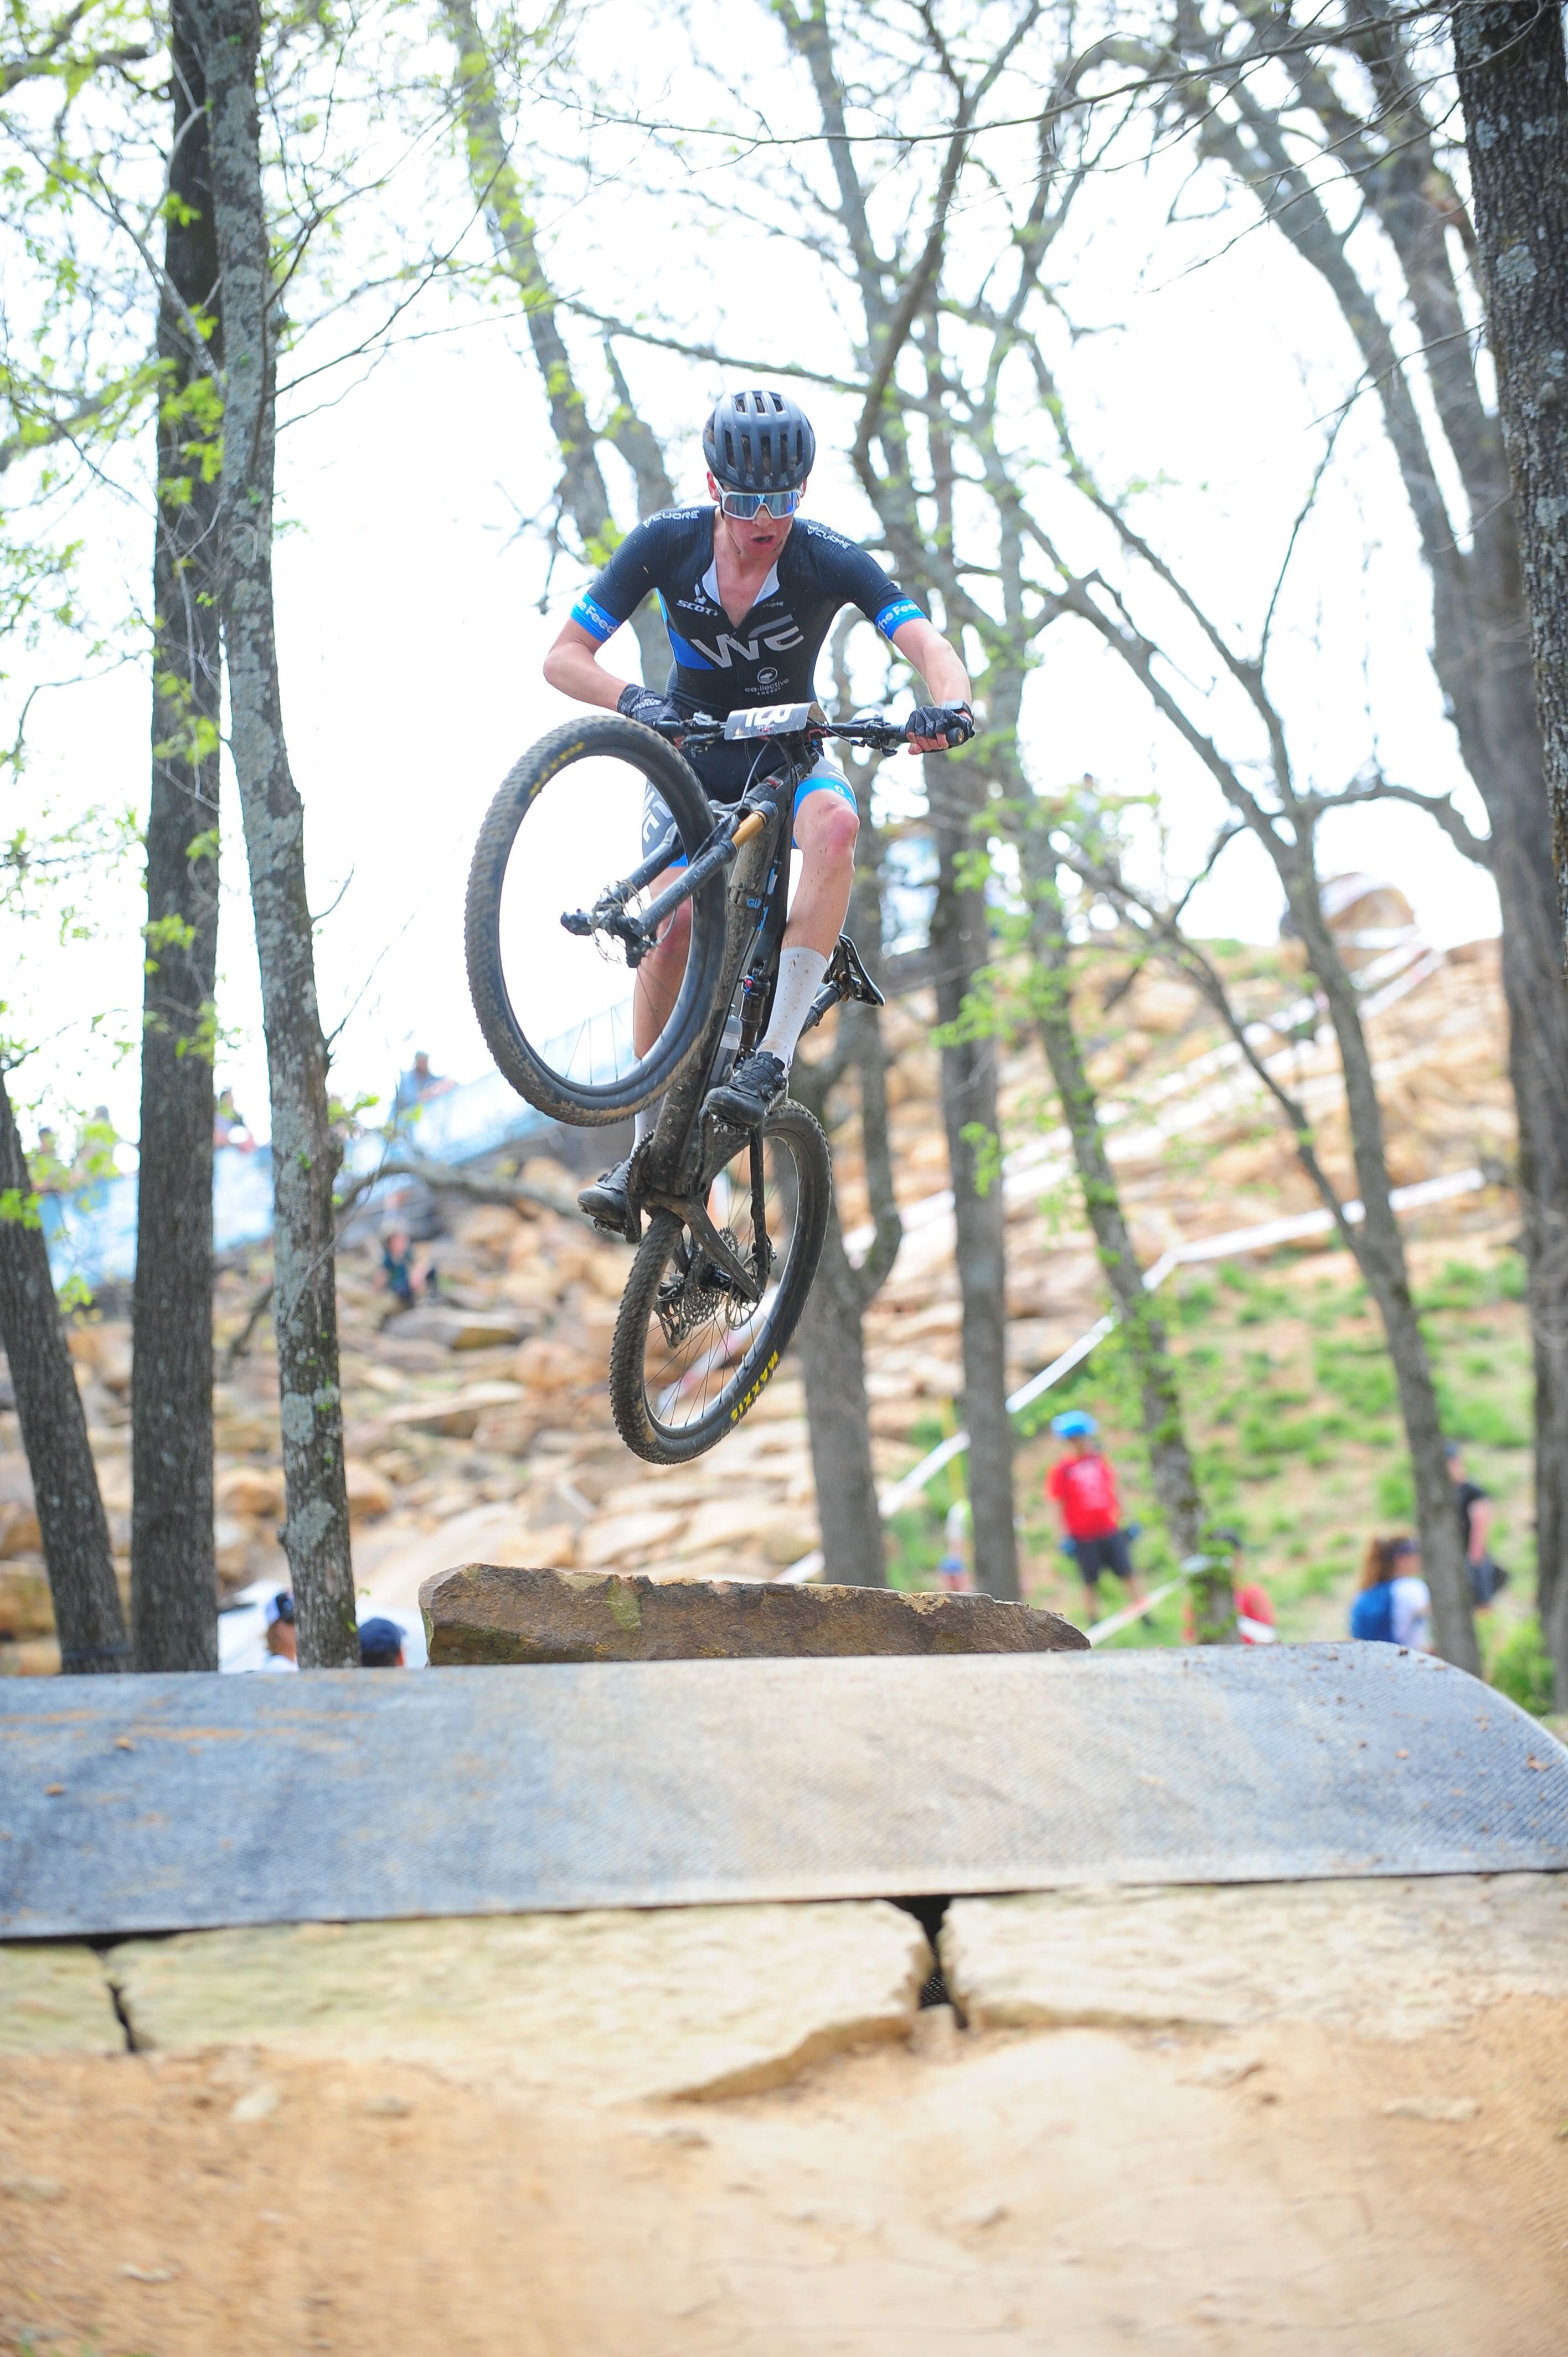 A guy on a mountain bike catches some air. 